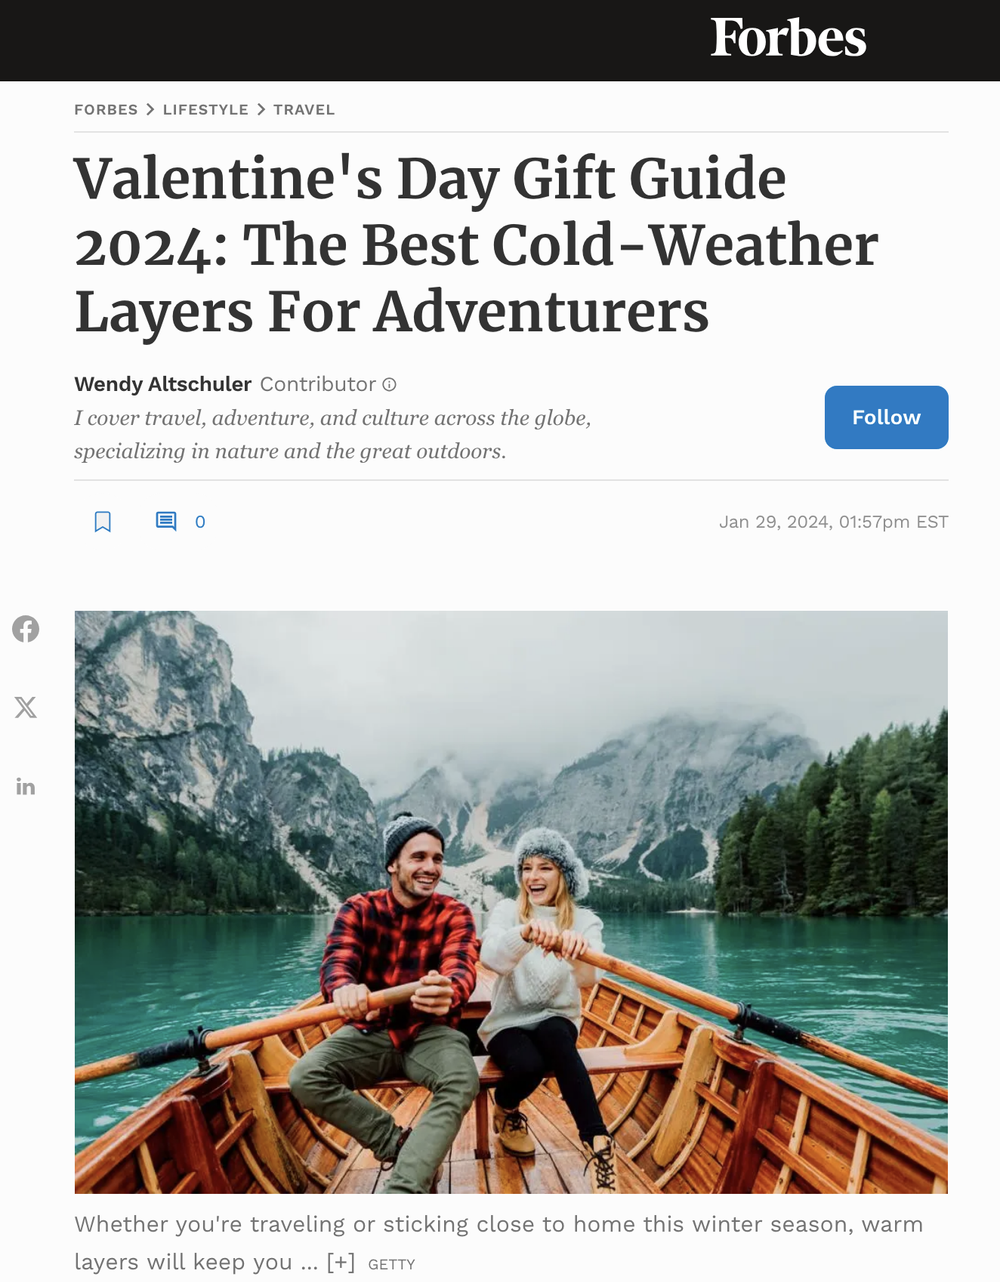 Valentine's Day Gift Guide 2024: The Best Cold-Weather Layers For Adventurers